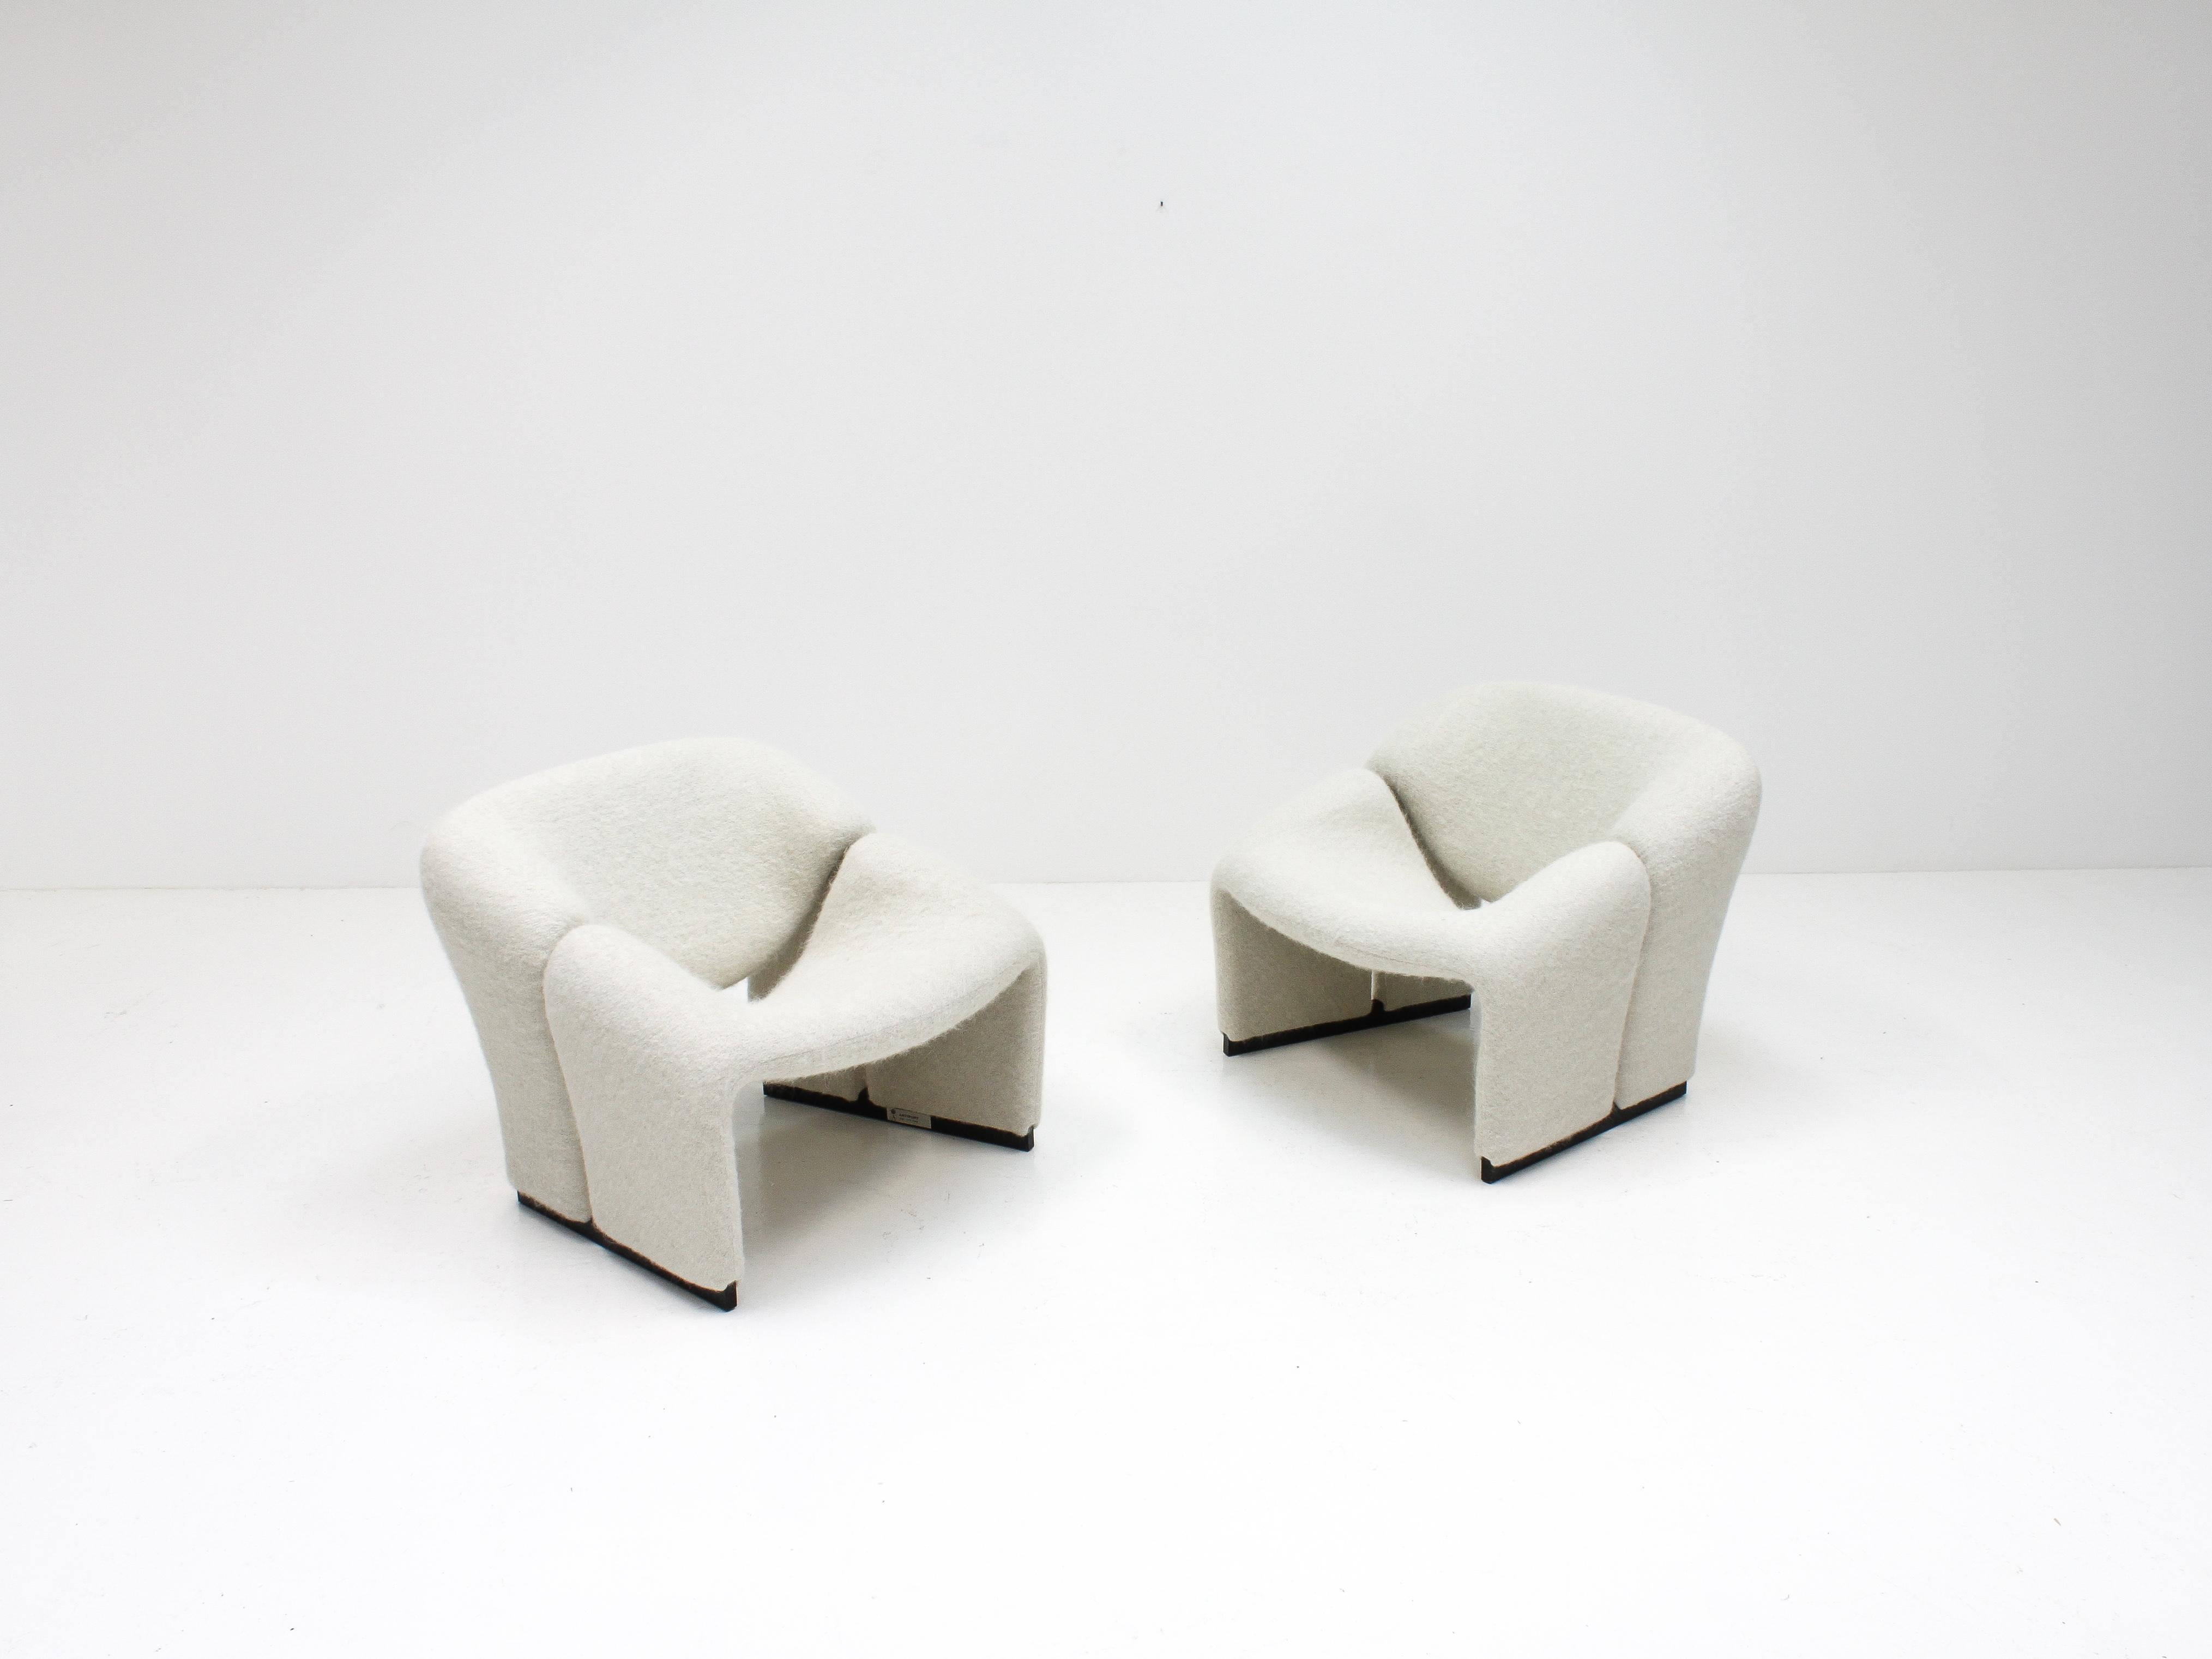 A pair of Pierre Paulin 'F580' lounge chairs for Artifort, the precursor to the Groovy chair, newly upholstered in fluffy wool, mohair and alpaca fabric which is produced by one of the most luxurious fabric manufacturers in the world, Pierre